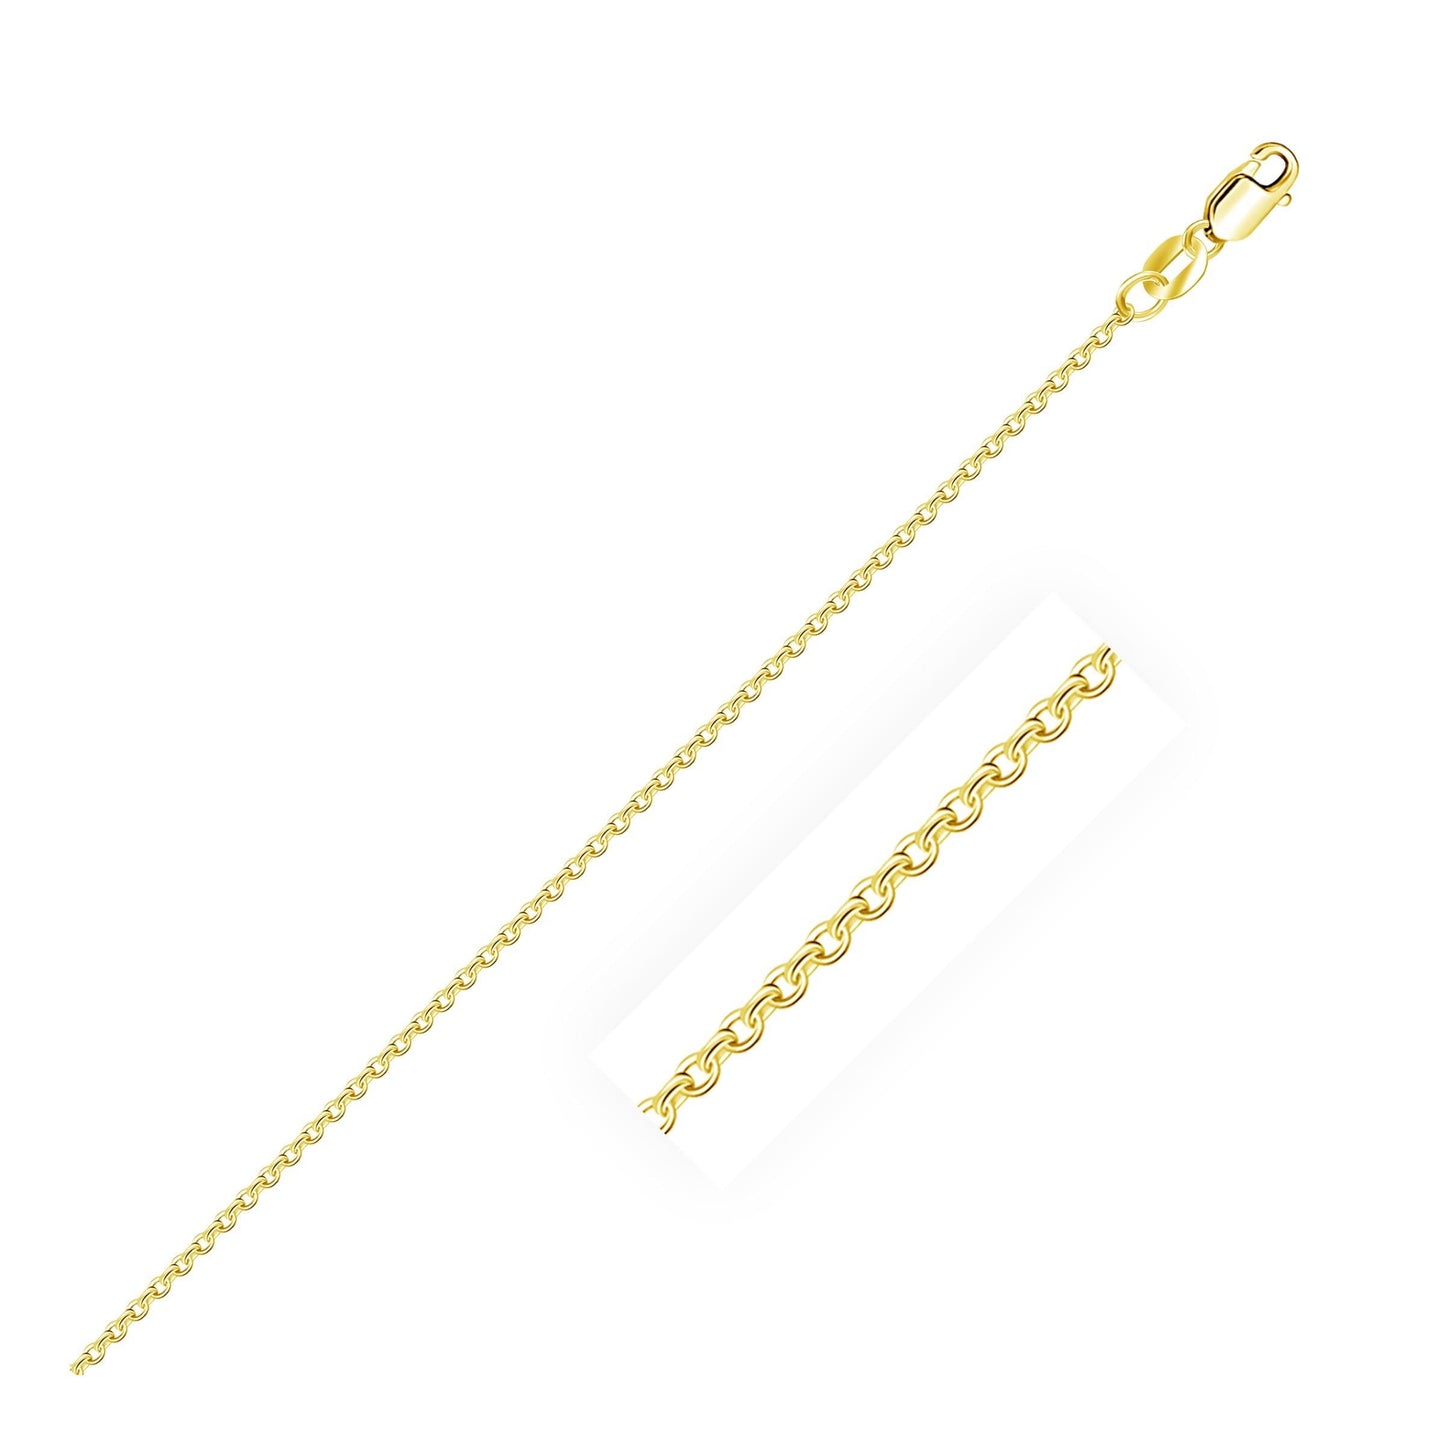 10k Yellow Gold Cable Chain in 1.1 mm